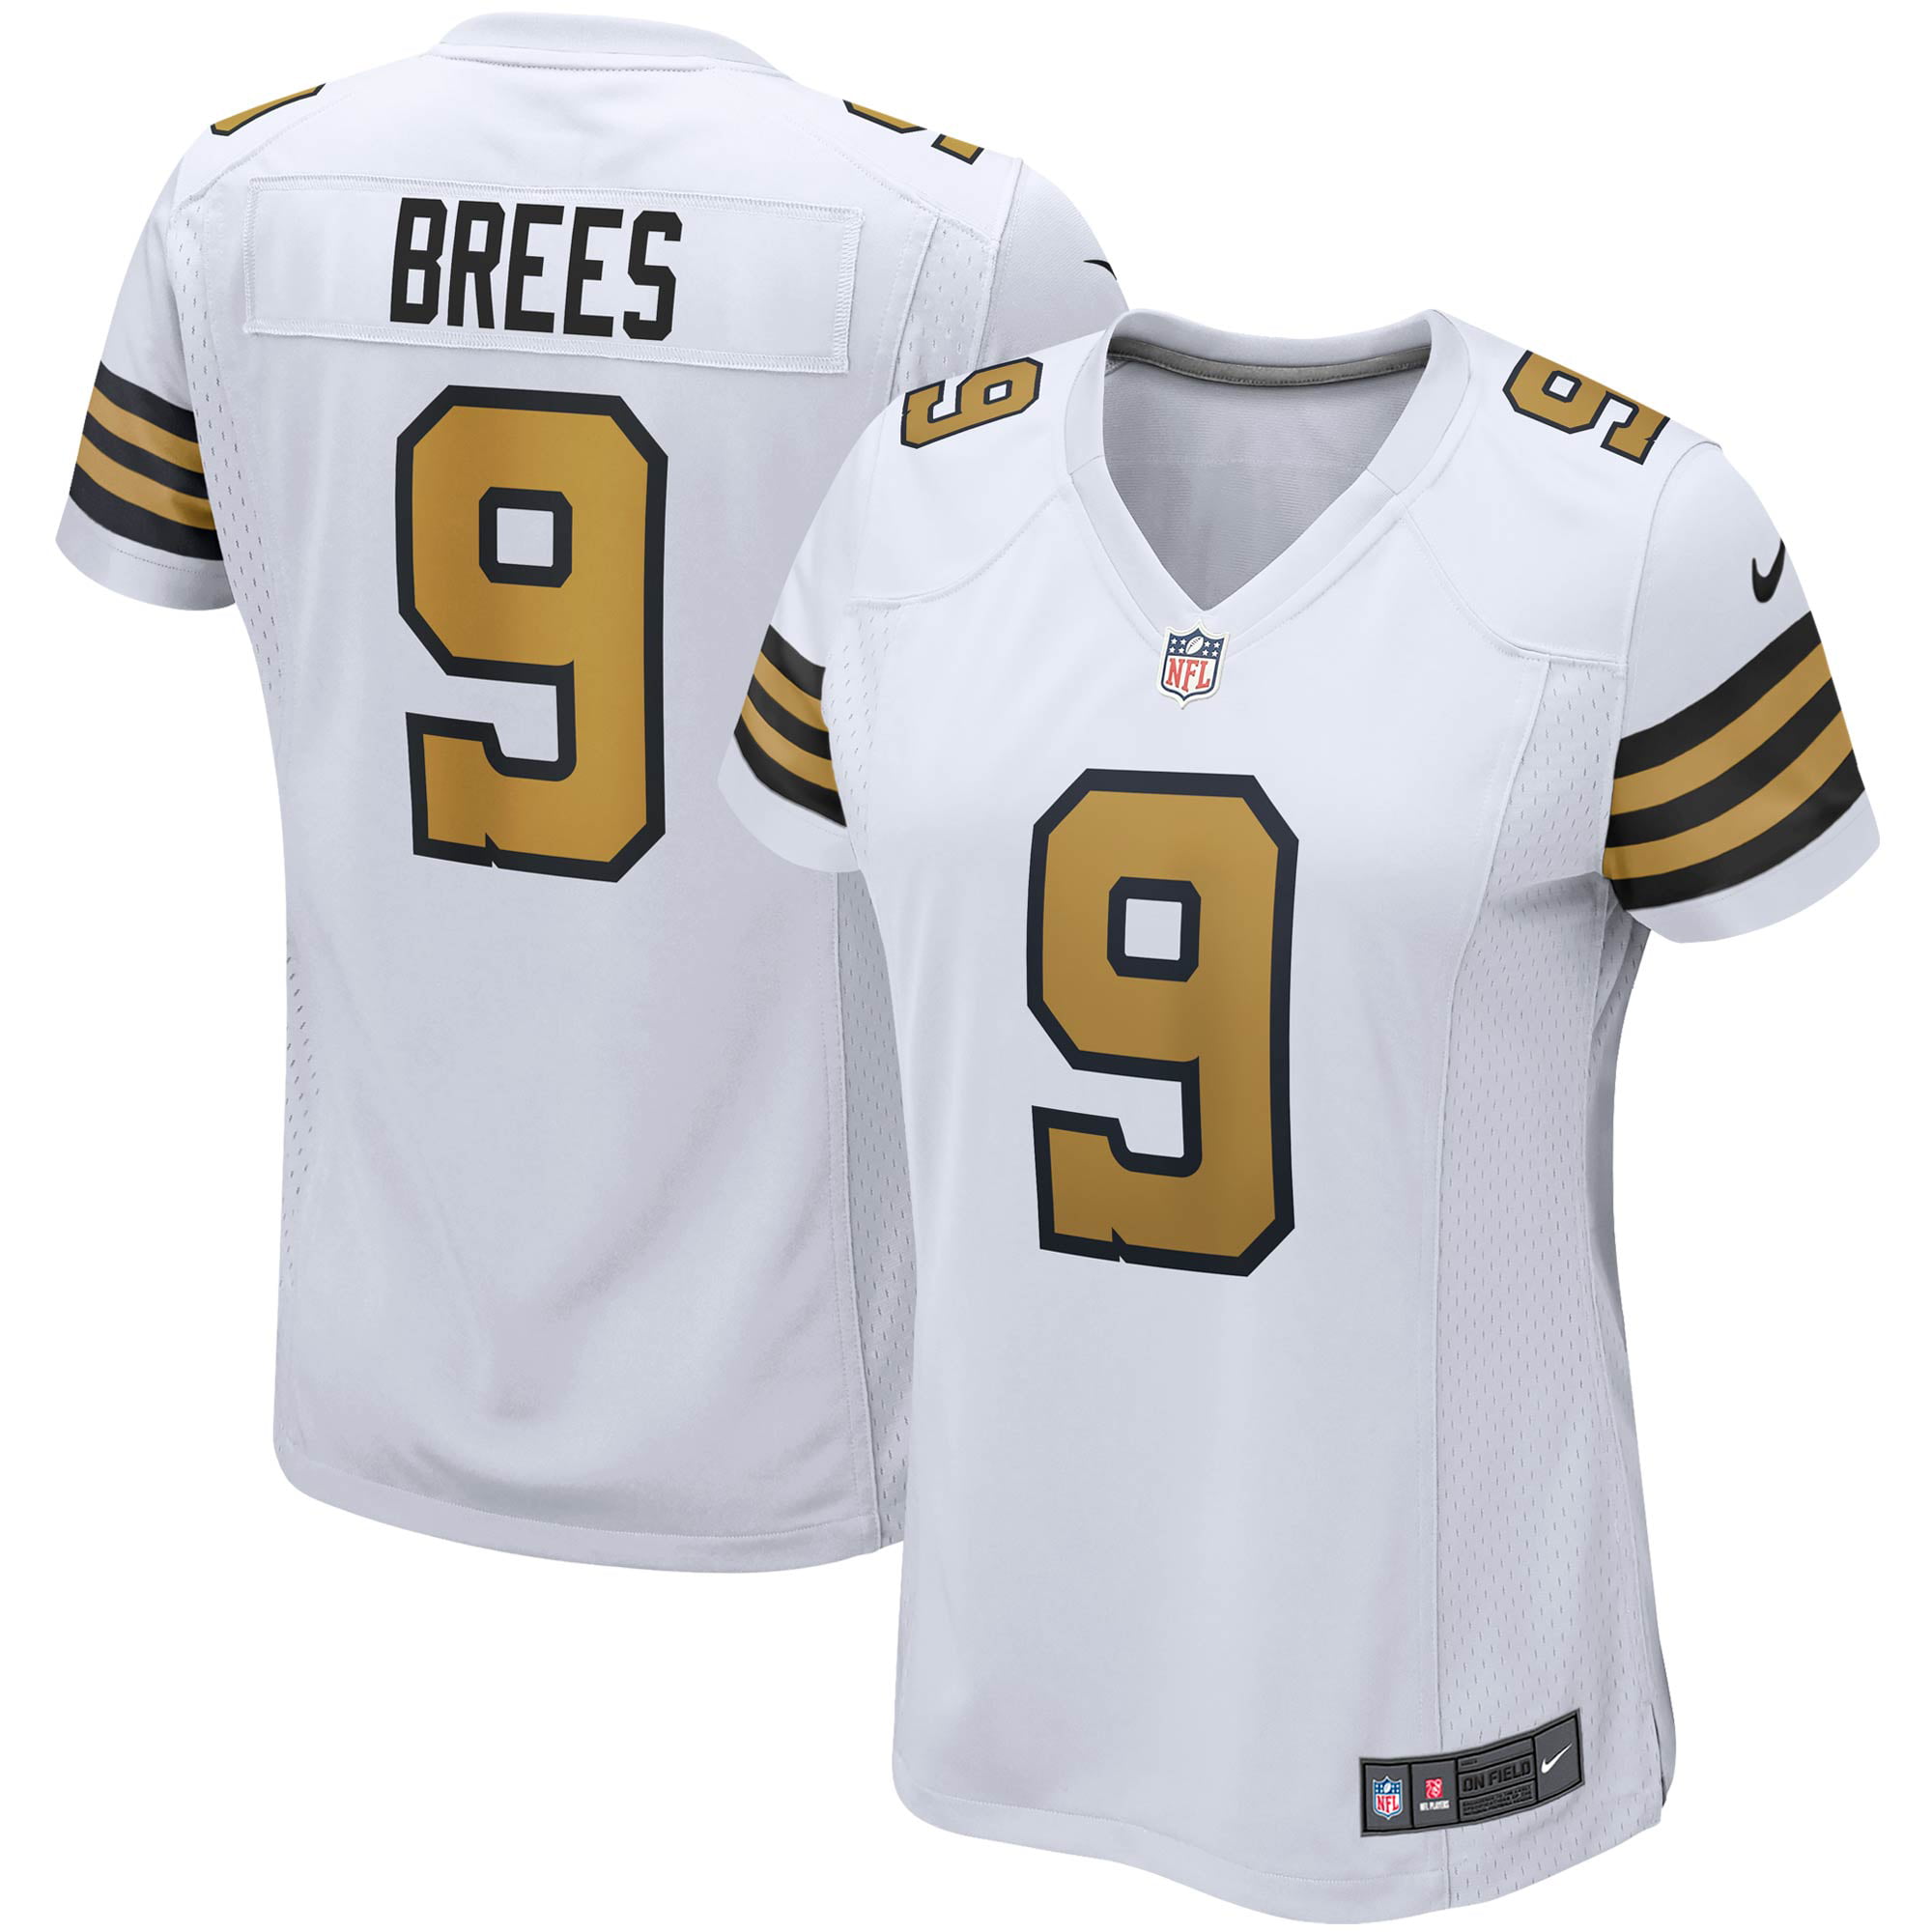 brees jersey white